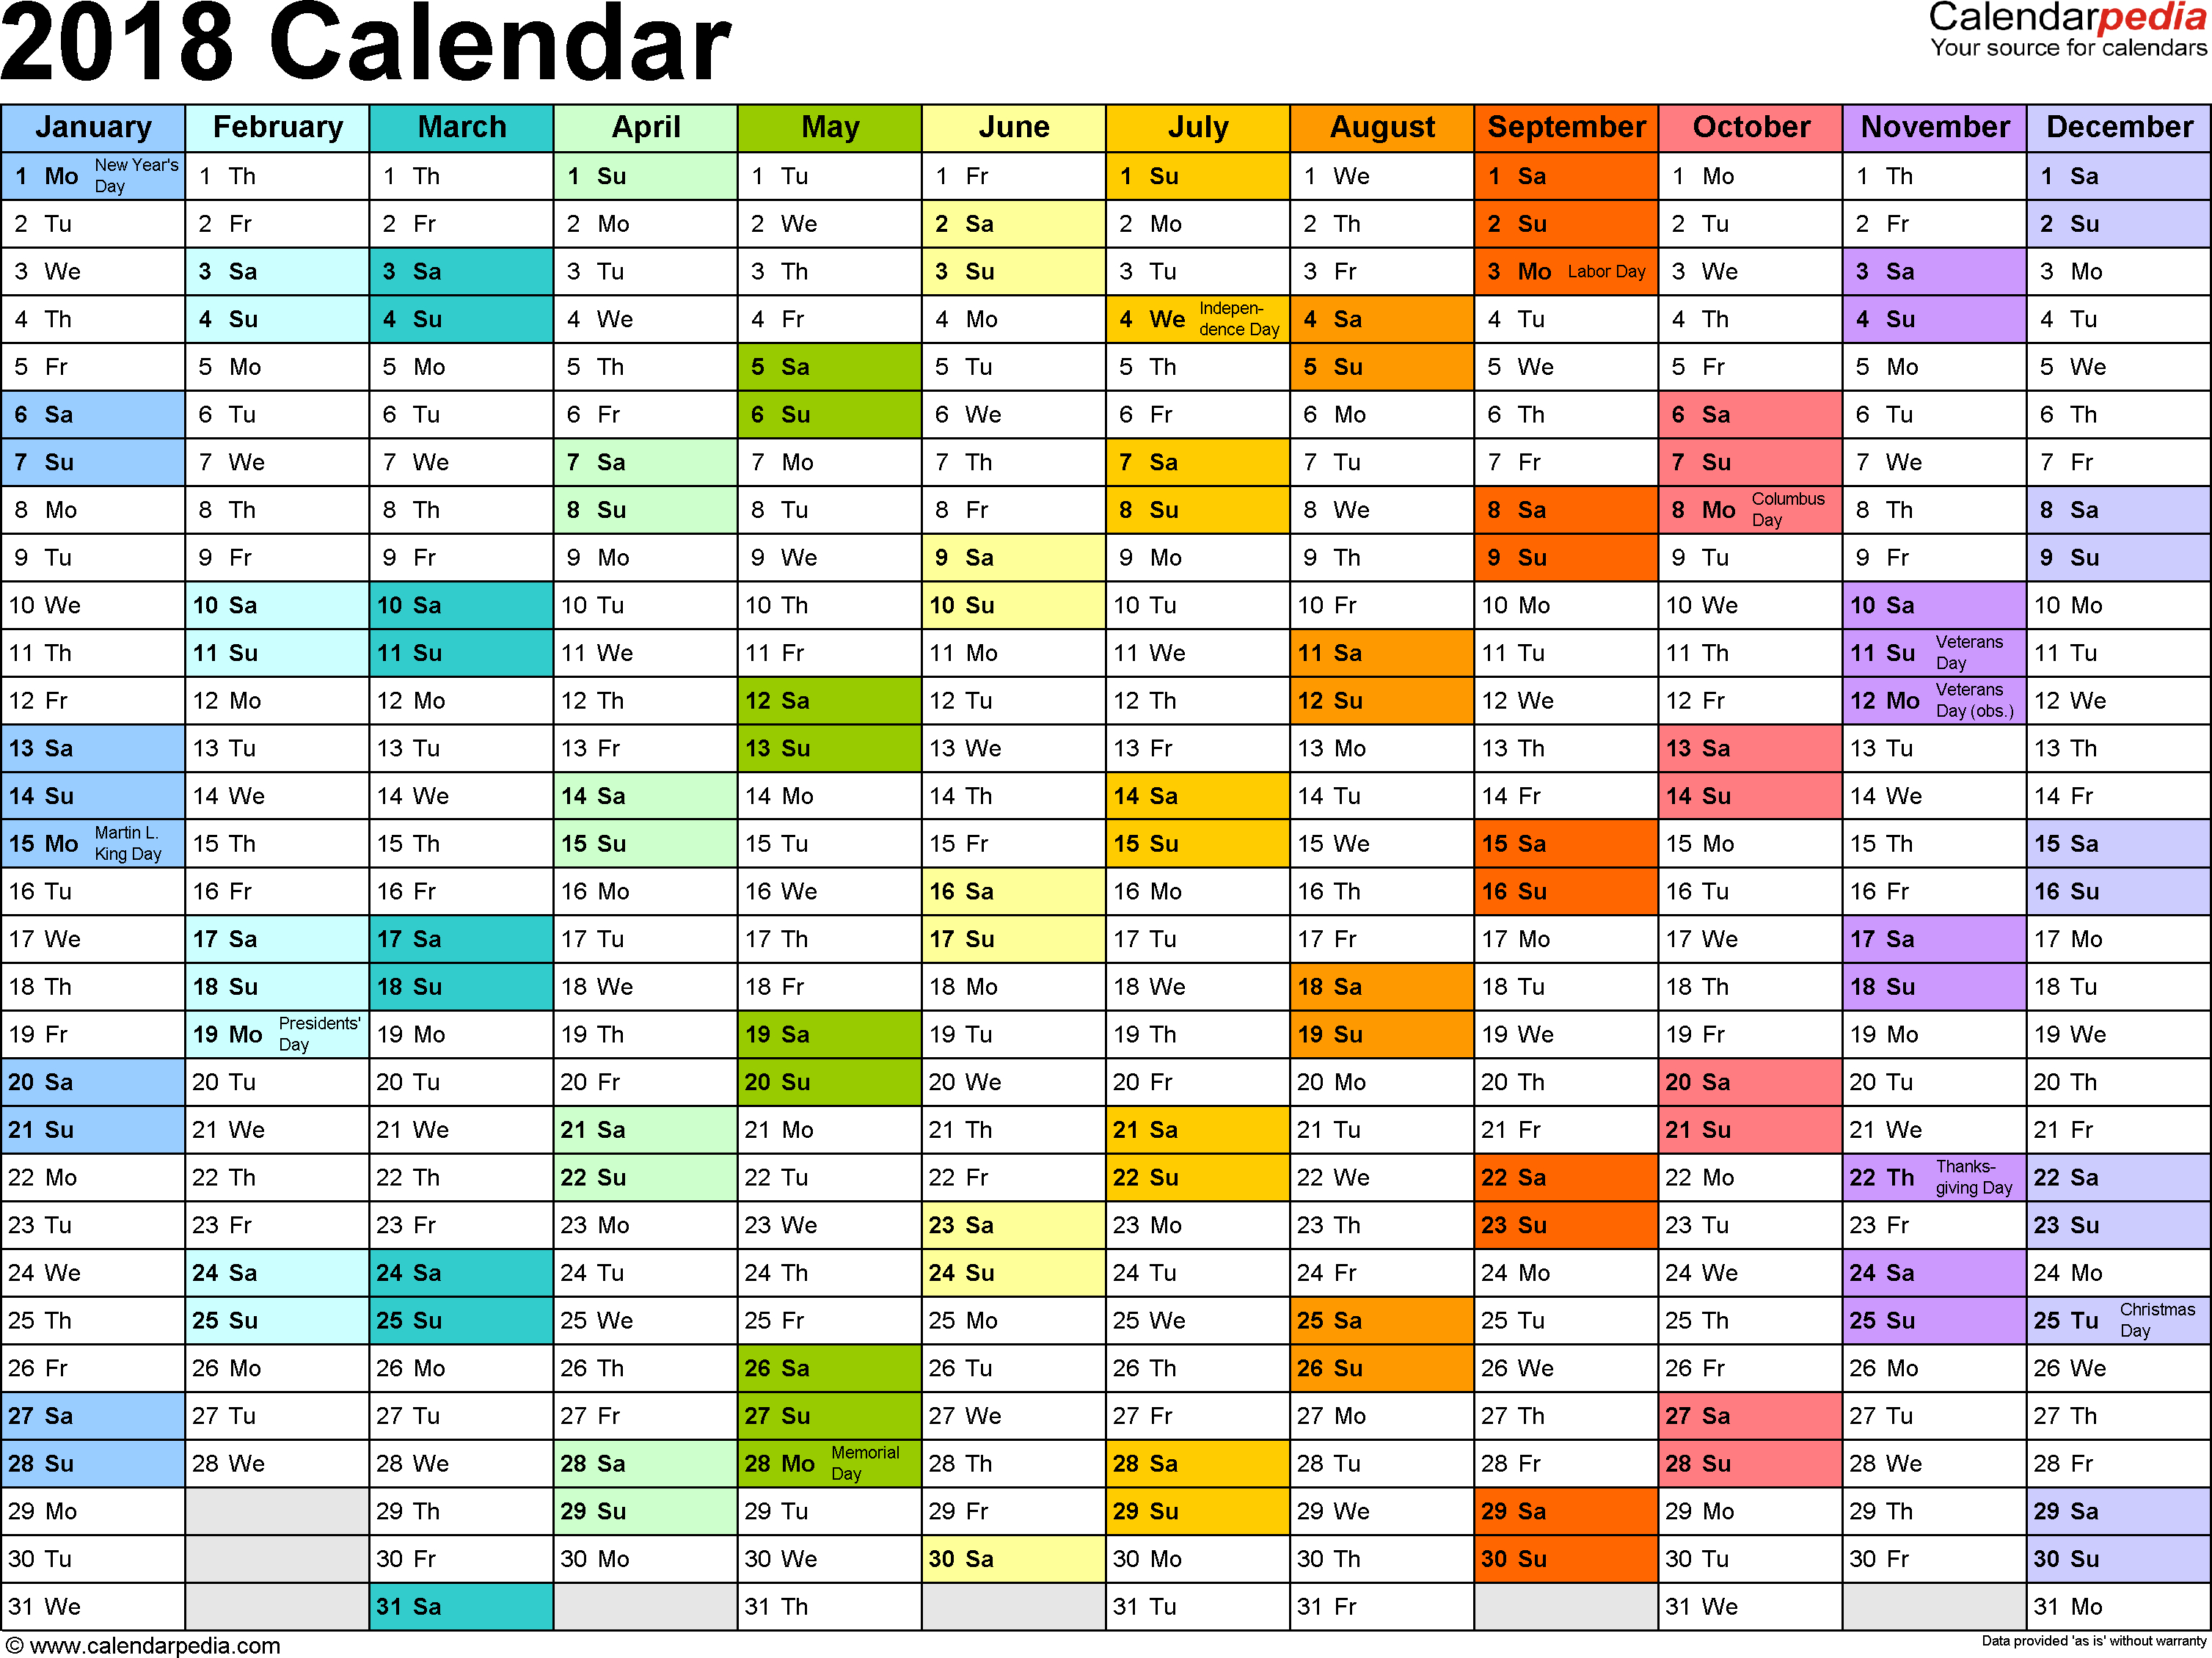 Vacation Spreadsheet Template 2018 Inside 2018 Calendar  Download 17 Free Printable Excel Templates .xlsx